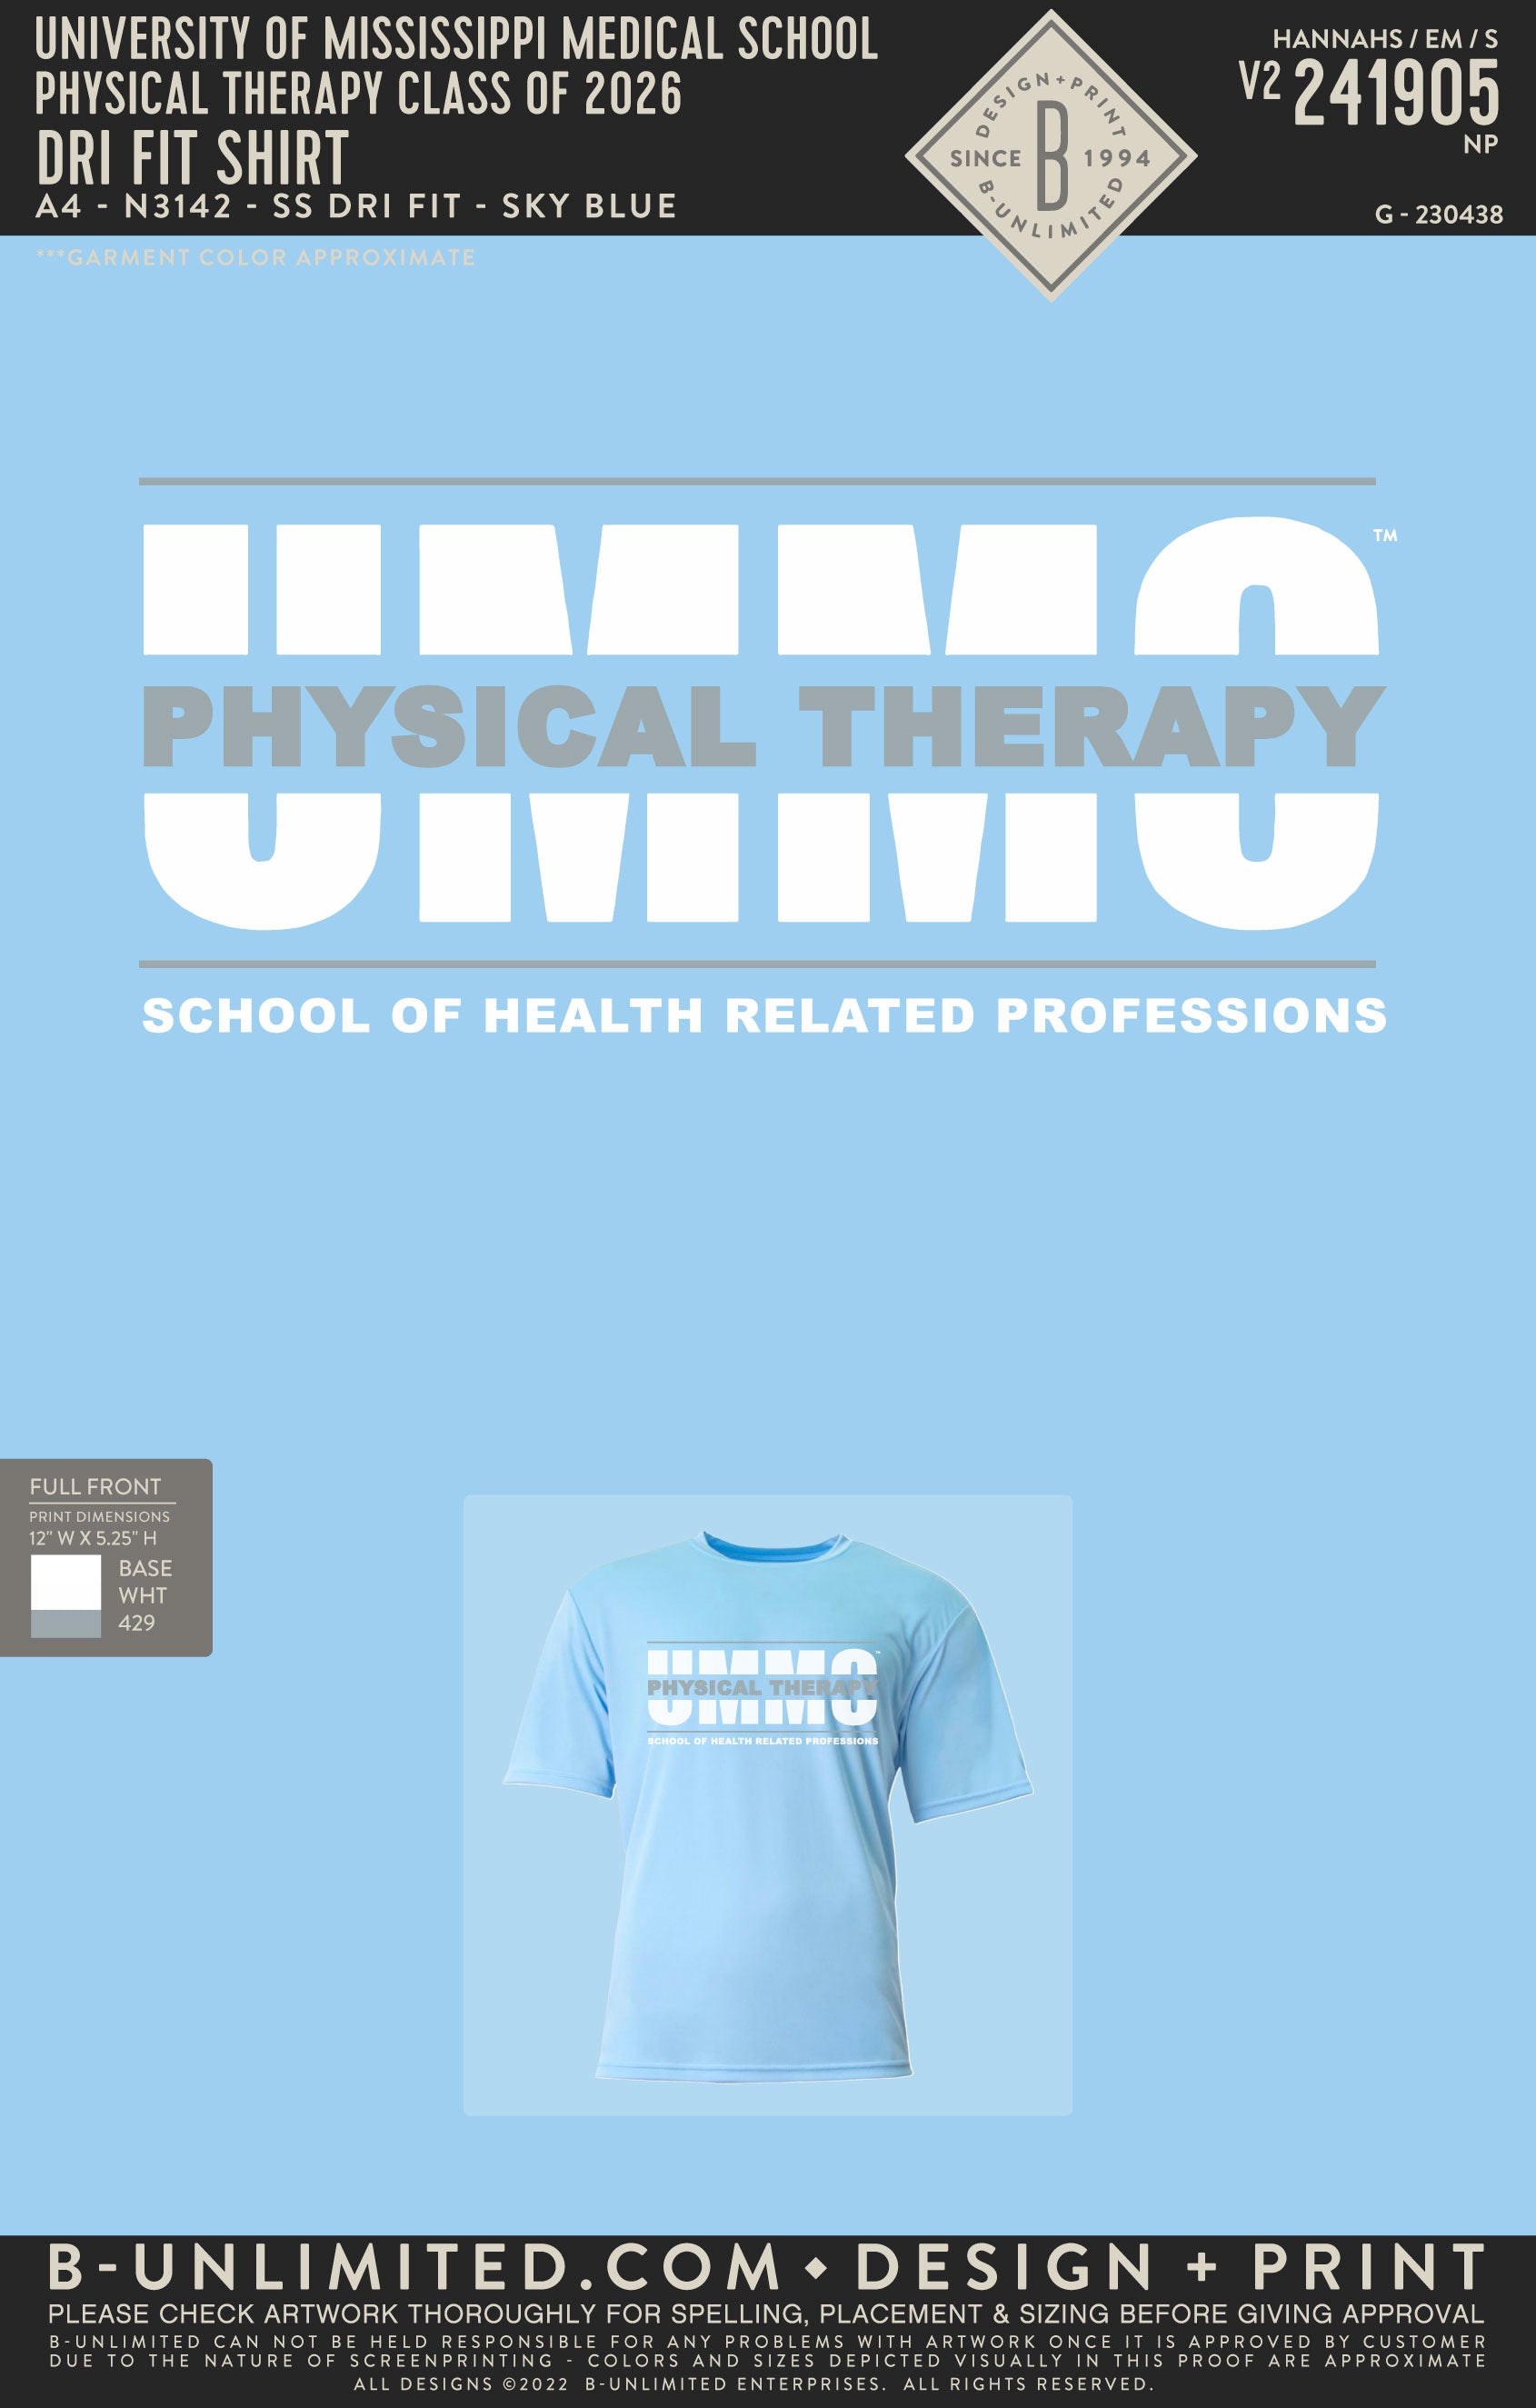 University of Mississippi Medical School Physical Therapy Class of 2026 - Dri Fit Shirt - A4 - N3142 - SS Dri Fit - Sky Blue